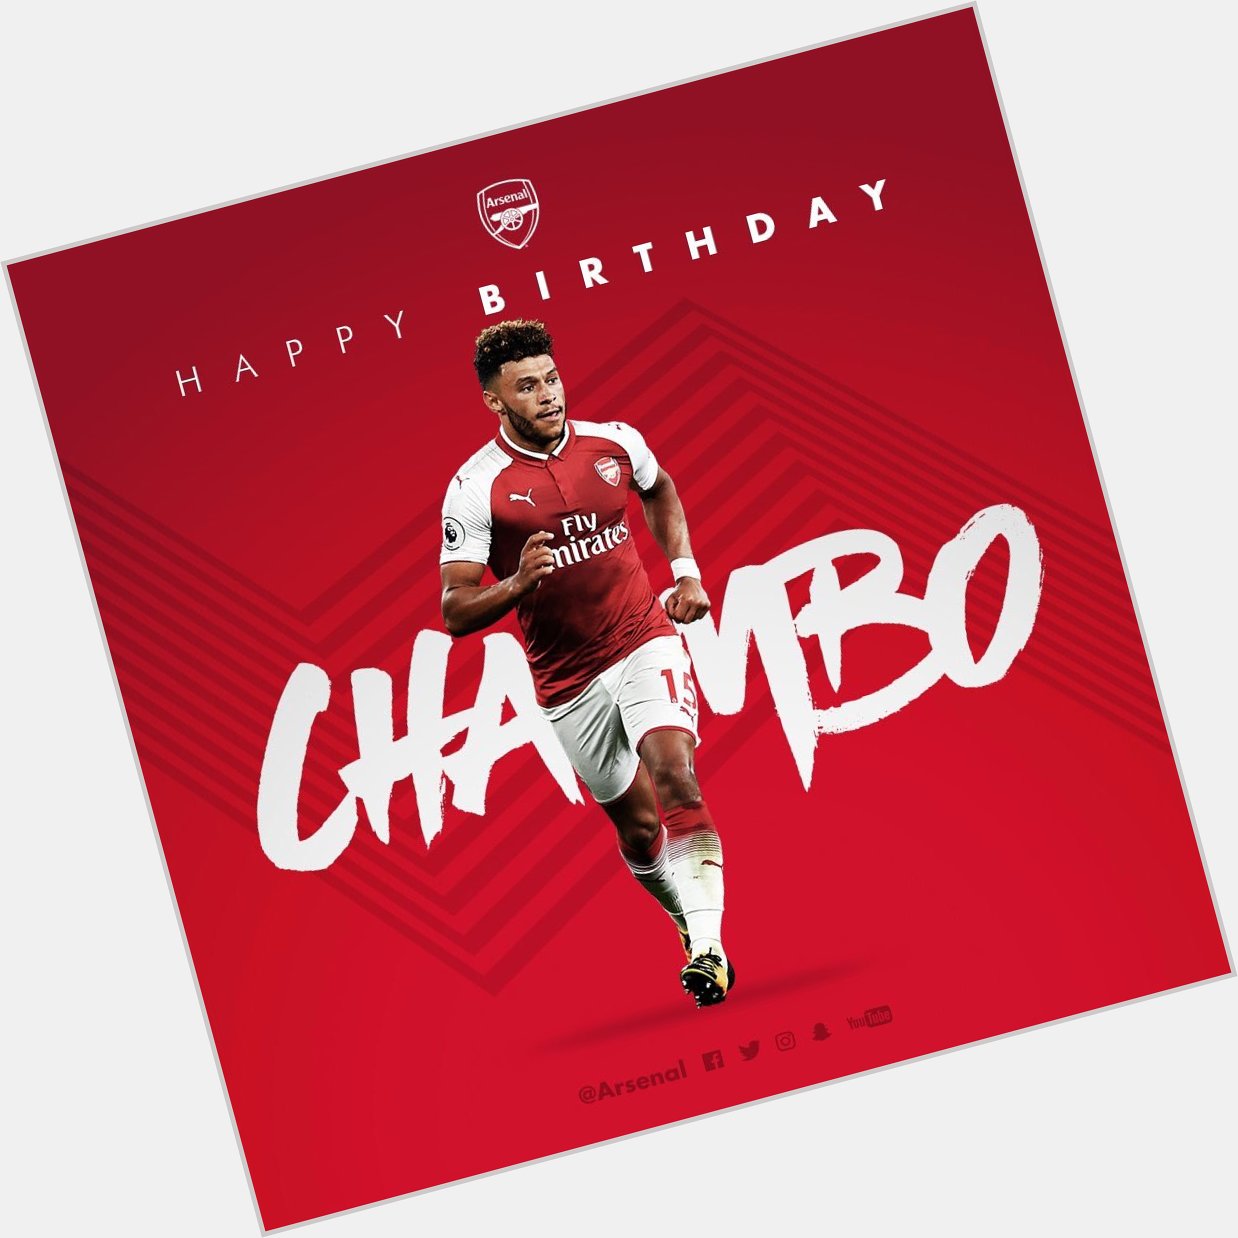   | Today we stop scouting Alex Oxlade-Chamberlain who turns 24 today!

Happy Birthday the Ox!  